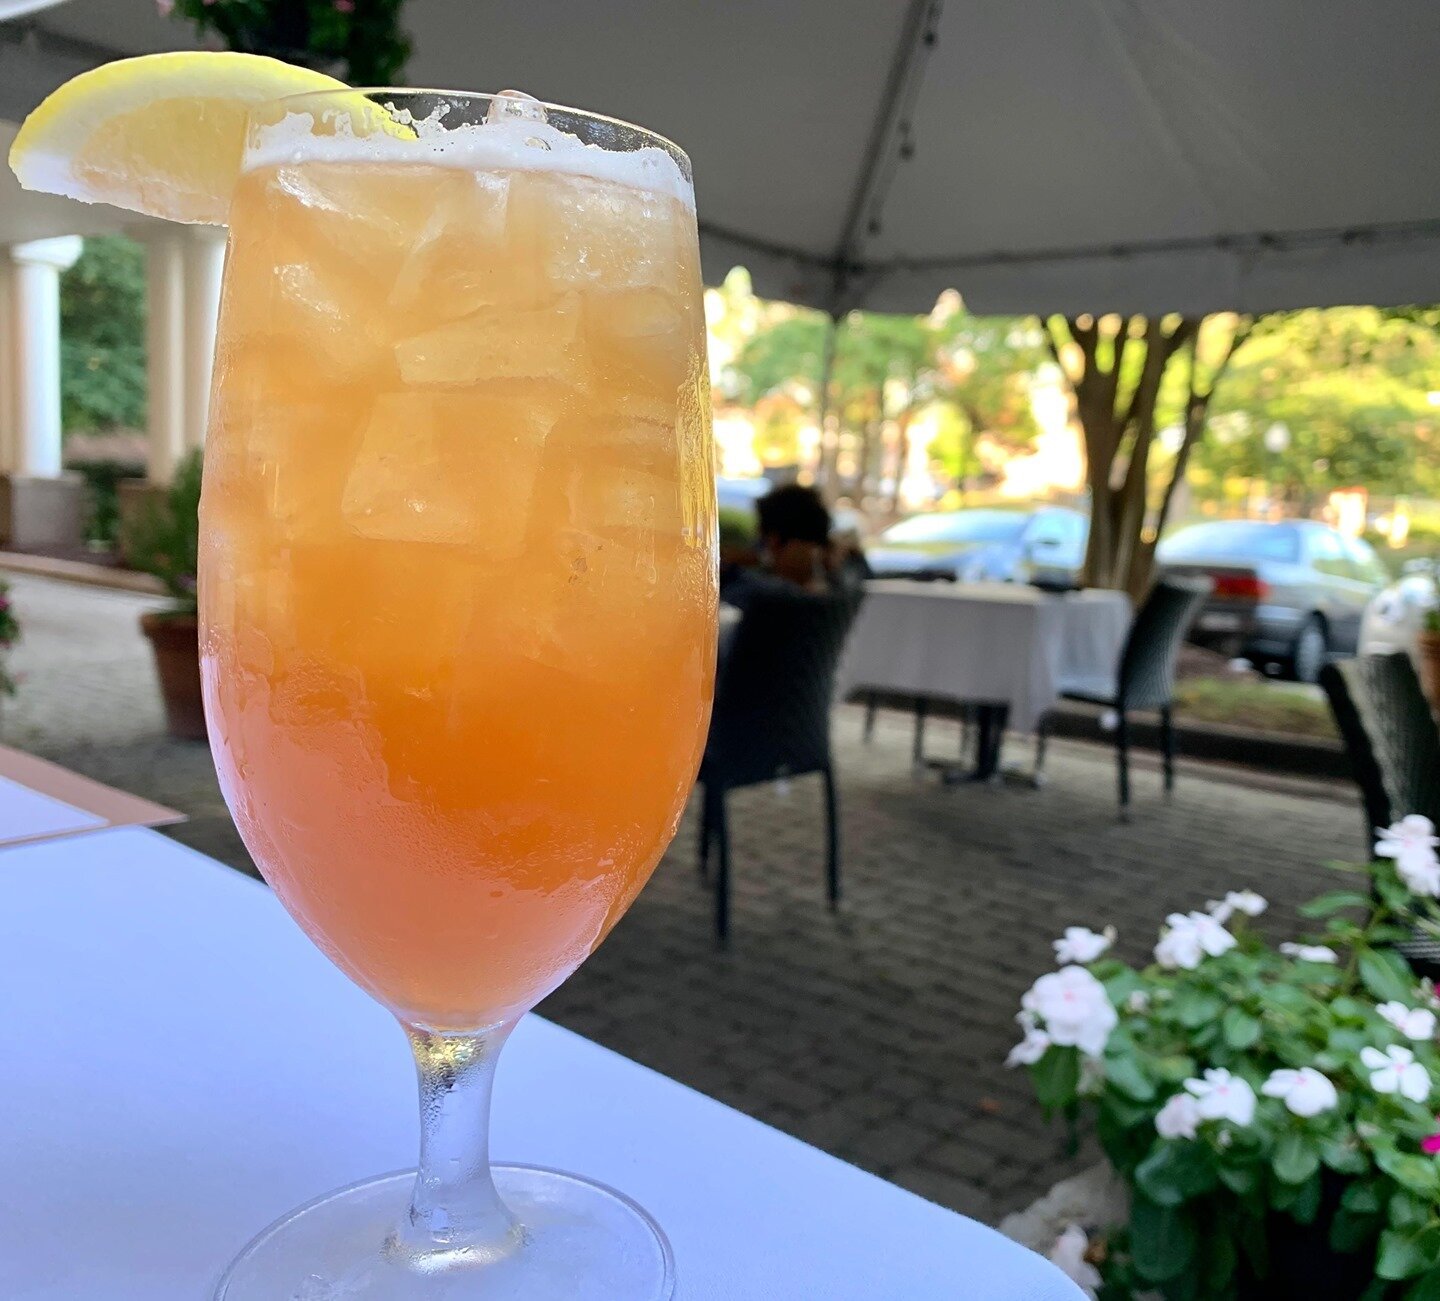 A cocktail with a touch of southern summer is a refreshing twist on a classic. The Peach Palmer is made with @larcenybourbon, lemon, peach syrup, and sweet tea.⠀
.⠀
.⠀
.⠀
 #ilpalionc #thesienahotel #visitchapelhill #visitnc #italian #italiancooking #